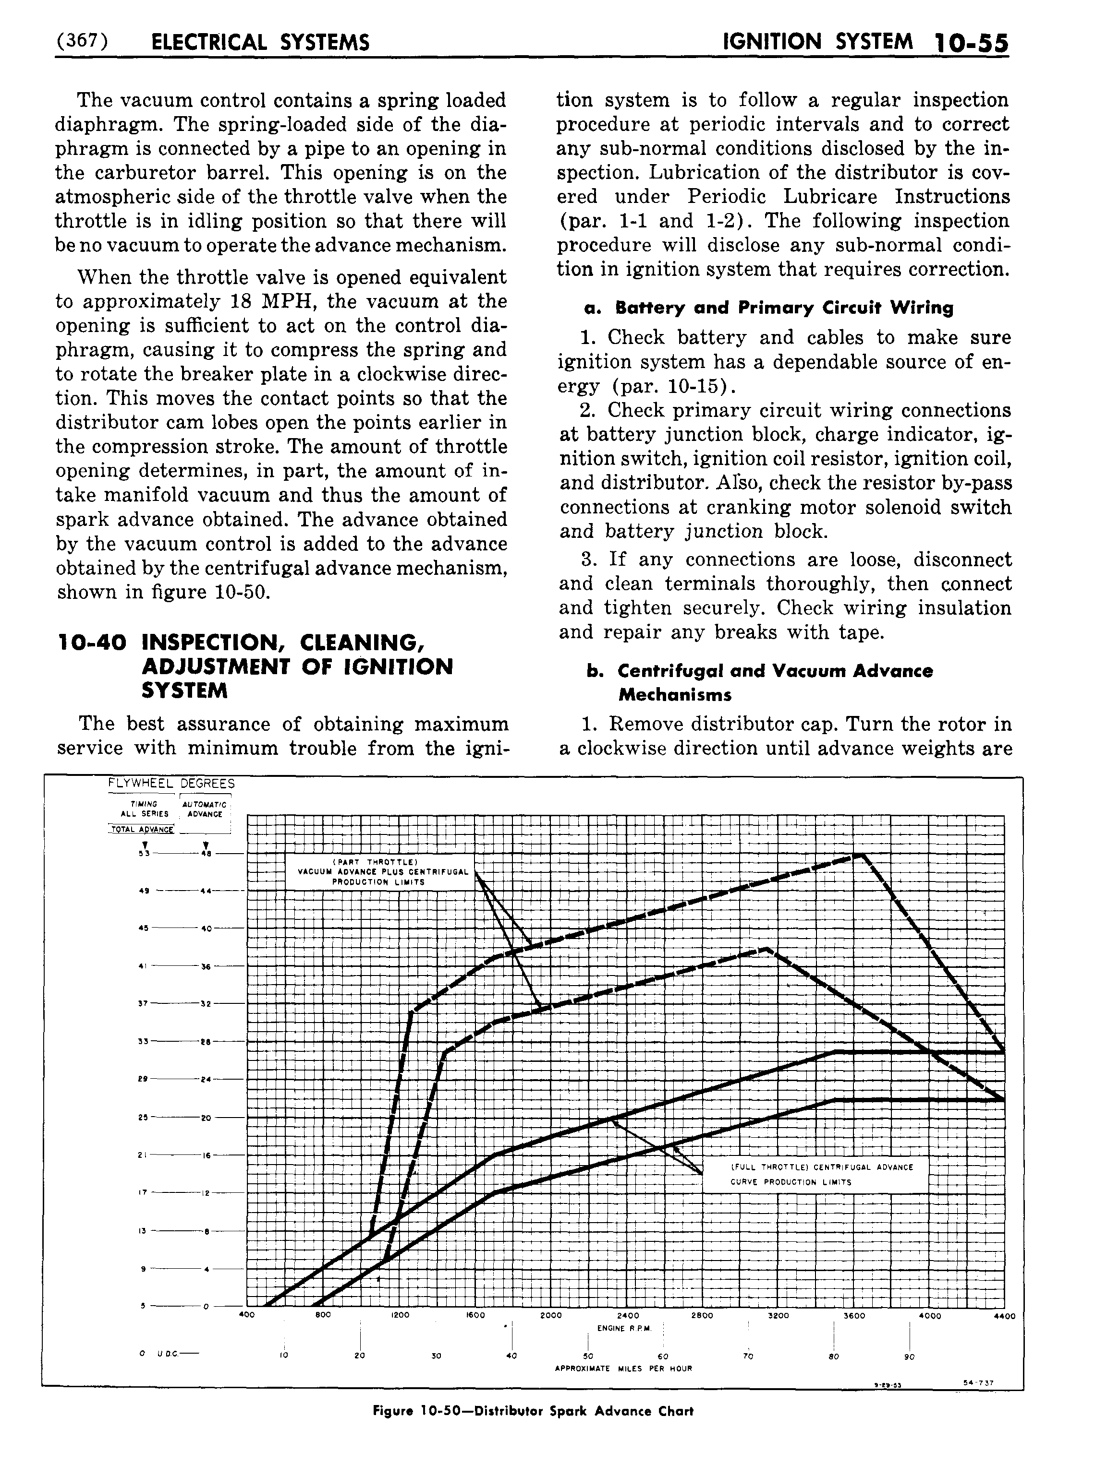 n_11 1954 Buick Shop Manual - Electrical Systems-055-055.jpg